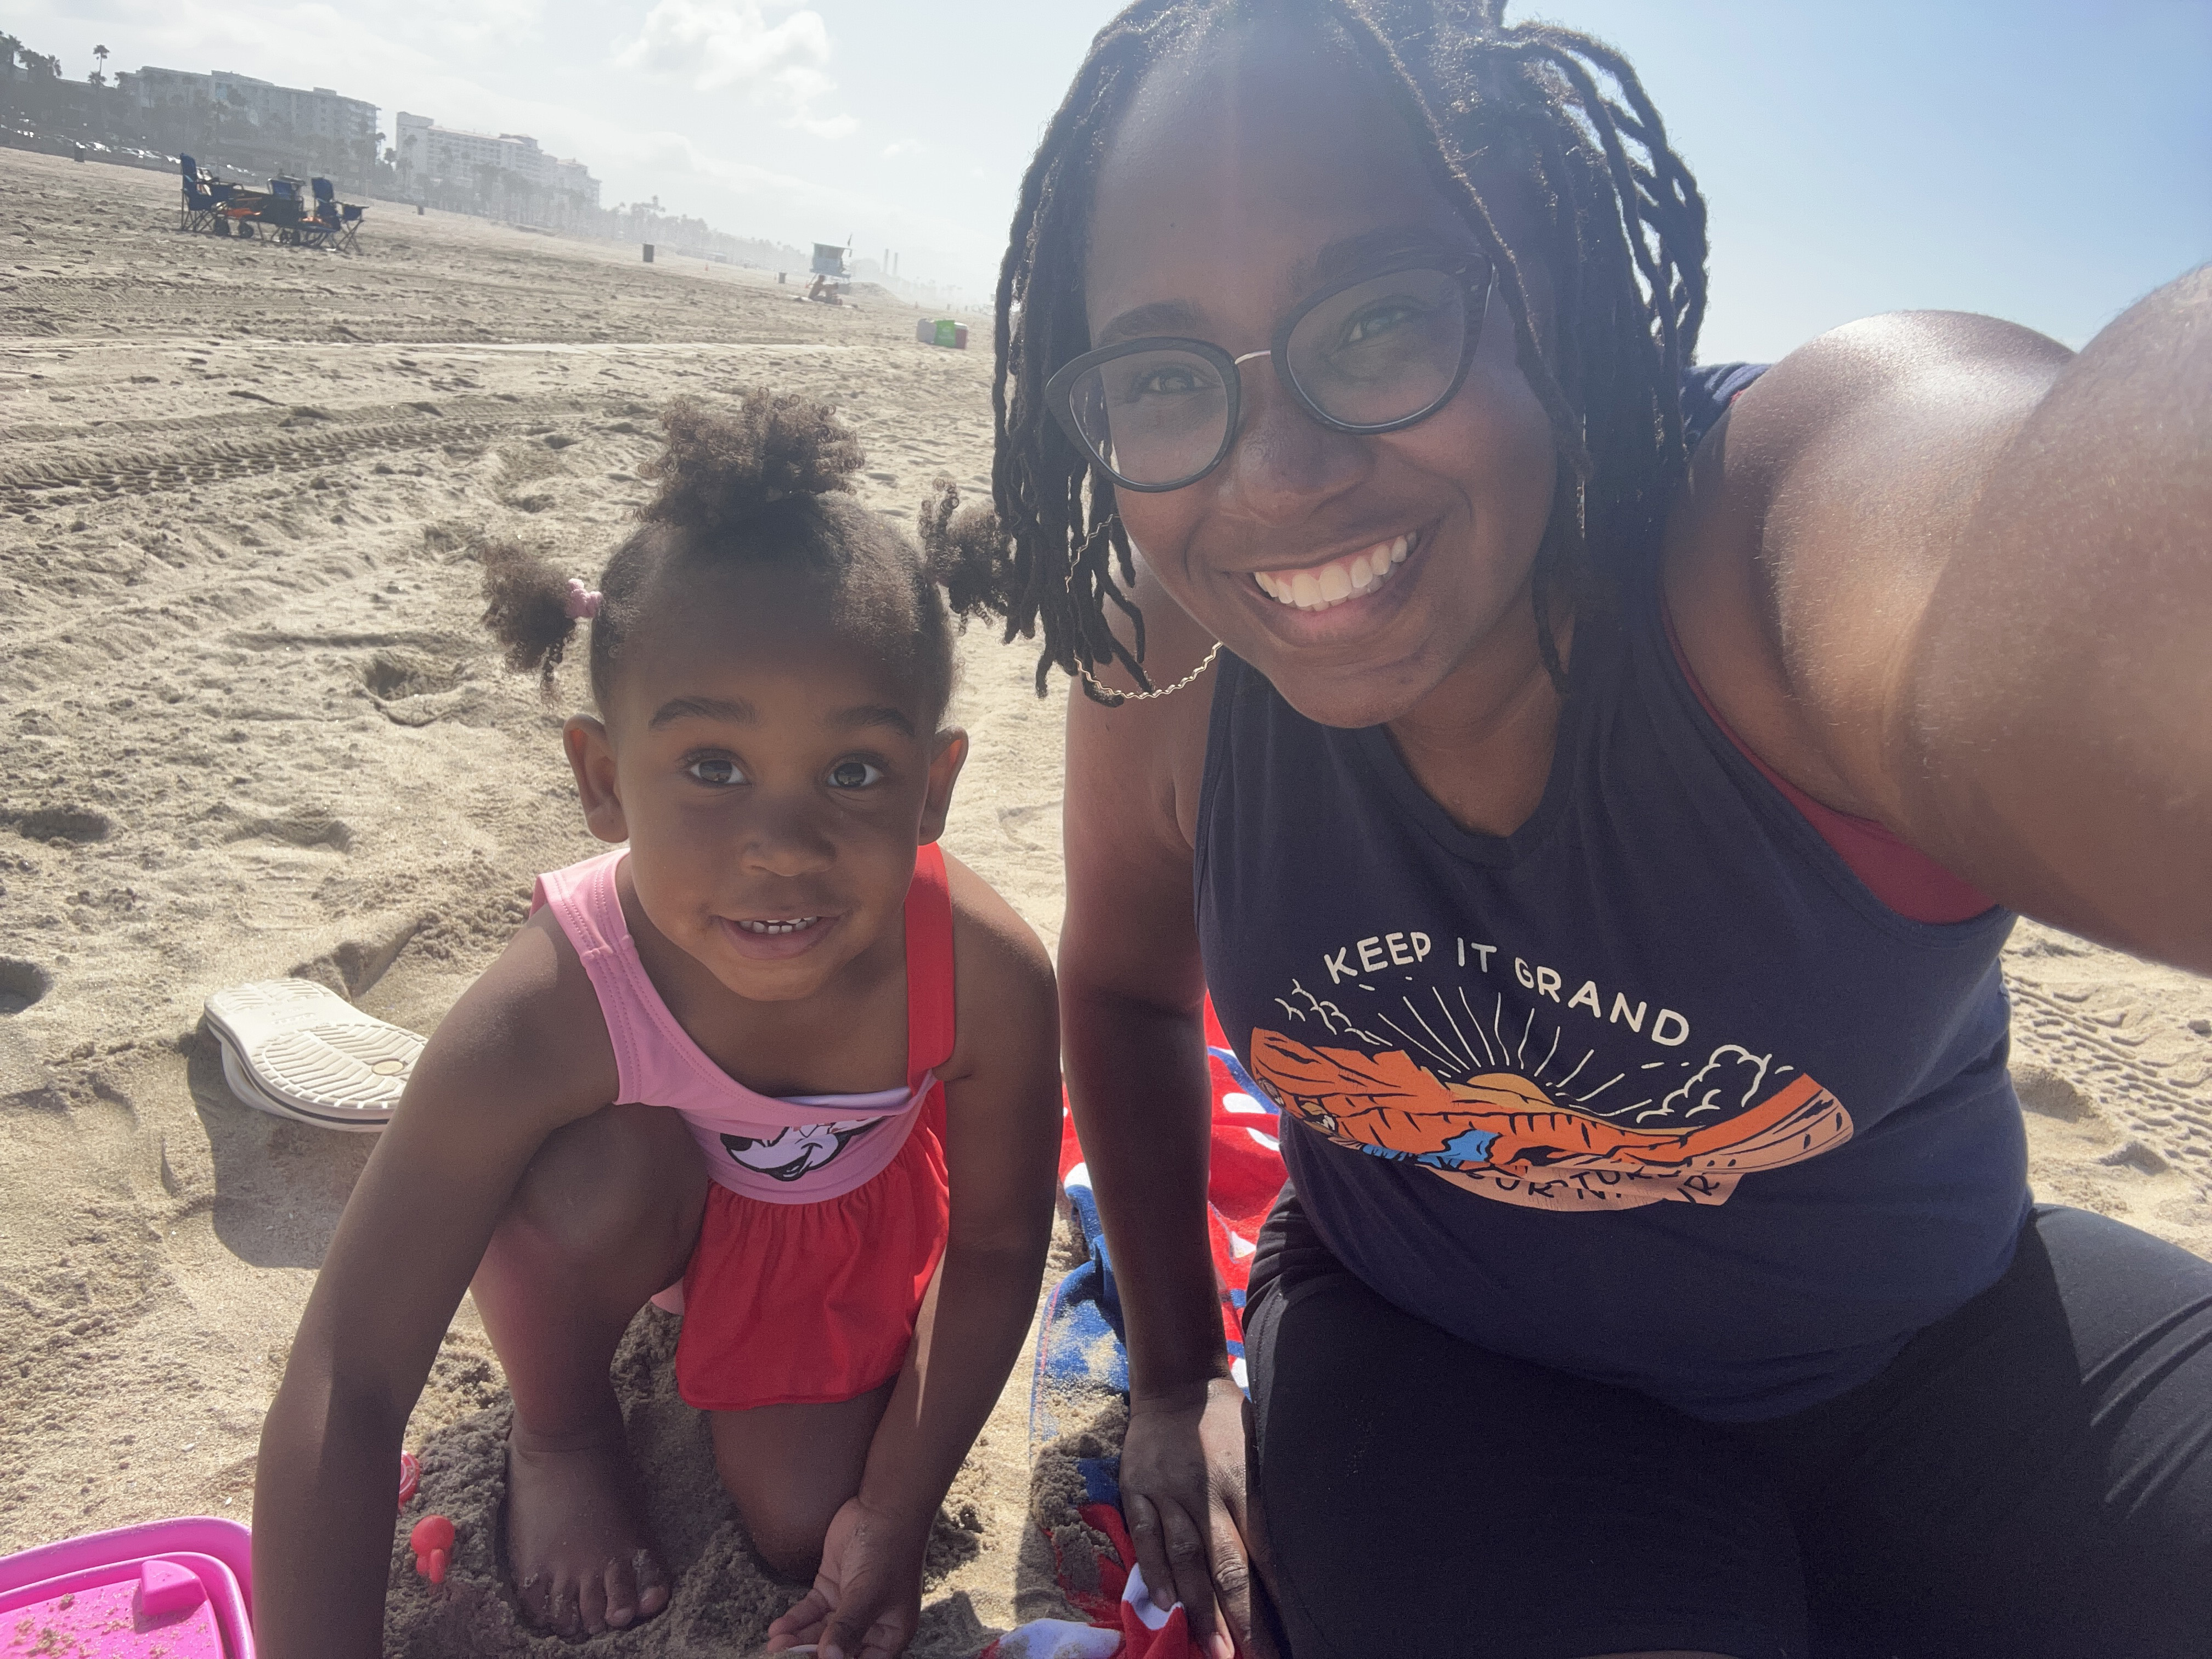 Janisa and her daughter Cali Ann pose in a selfie at the beach during their vacation.